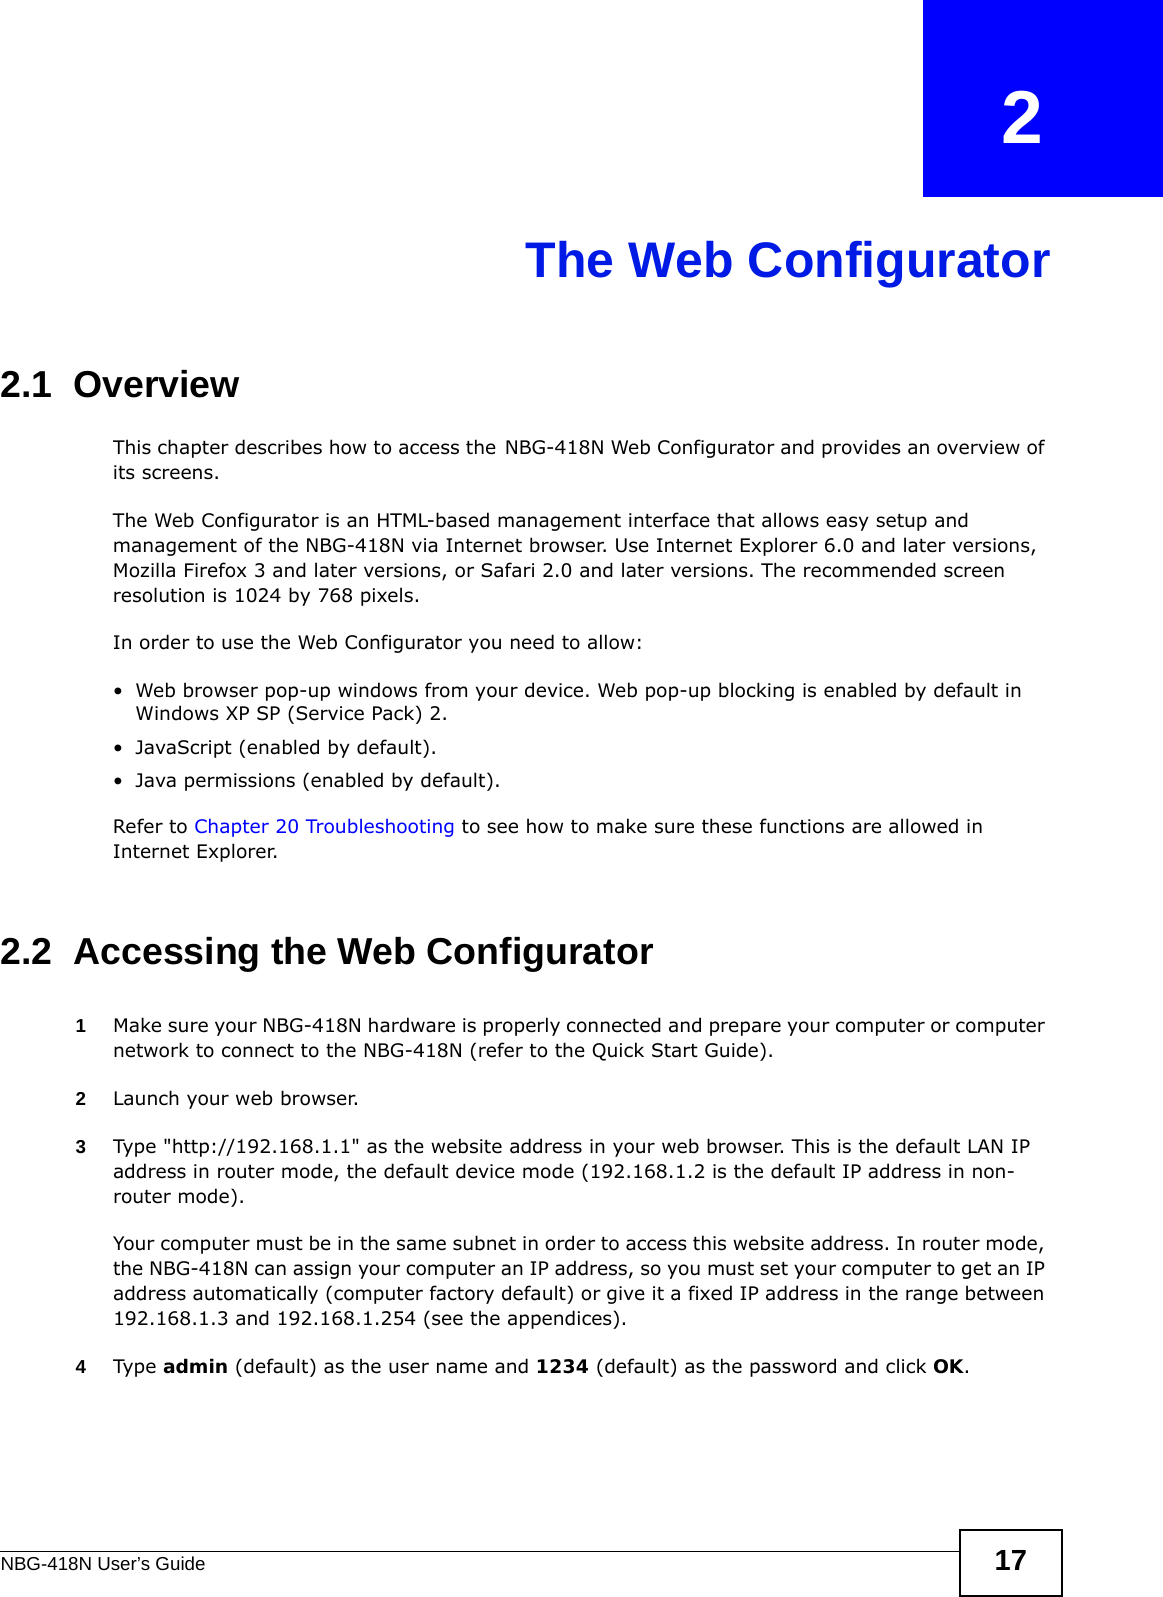 NBG-418N User’s Guide 17CHAPTER   2The Web Configurator2.1  OverviewThis chapter describes how to access the NBG-418N Web Configurator and provides an overview of its screens.The Web Configurator is an HTML-based management interface that allows easy setup and management of the NBG-418N via Internet browser. Use Internet Explorer 6.0 and later versions, Mozilla Firefox 3 and later versions, or Safari 2.0 and later versions. The recommended screen resolution is 1024 by 768 pixels.In order to use the Web Configurator you need to allow:• Web browser pop-up windows from your device. Web pop-up blocking is enabled by default in Windows XP SP (Service Pack) 2.• JavaScript (enabled by default).• Java permissions (enabled by default).Refer to Chapter 20 Troubleshooting to see how to make sure these functions are allowed in Internet Explorer.2.2  Accessing the Web Configurator1Make sure your NBG-418N hardware is properly connected and prepare your computer or computer network to connect to the NBG-418N (refer to the Quick Start Guide).2Launch your web browser.3Type &quot;http://192.168.1.1&quot; as the website address in your web browser. This is the default LAN IP address in router mode, the default device mode (192.168.1.2 is the default IP address in non-router mode).Your computer must be in the same subnet in order to access this website address. In router mode, the NBG-418N can assign your computer an IP address, so you must set your computer to get an IP address automatically (computer factory default) or give it a fixed IP address in the range between 192.168.1.3 and 192.168.1.254 (see the appendices).4Type admin (default) as the user name and 1234 (default) as the password and click OK. 